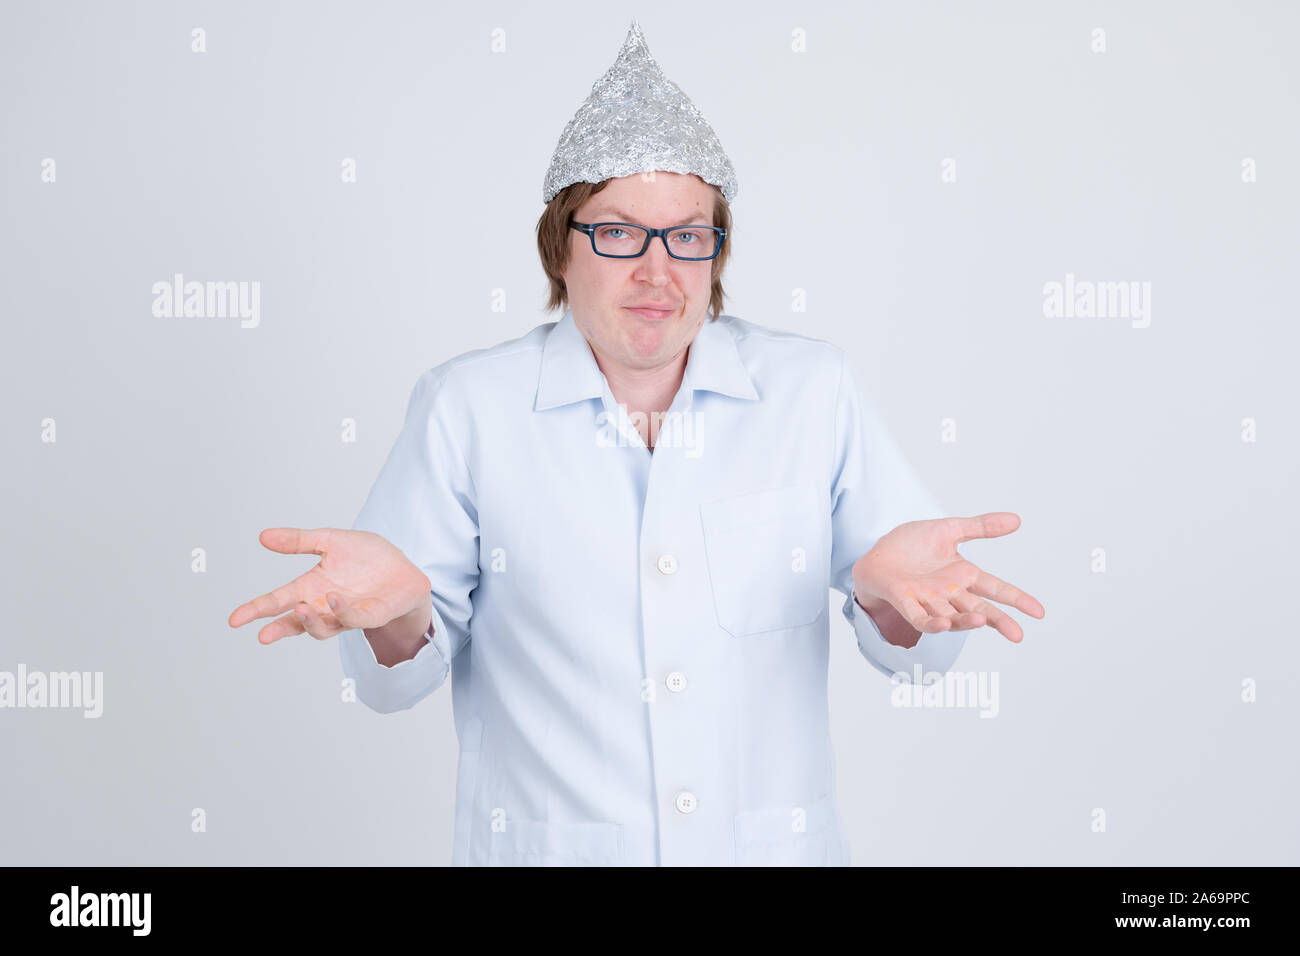 Young man doctor with tinfoil hat shrugging shoulders Stock Photo